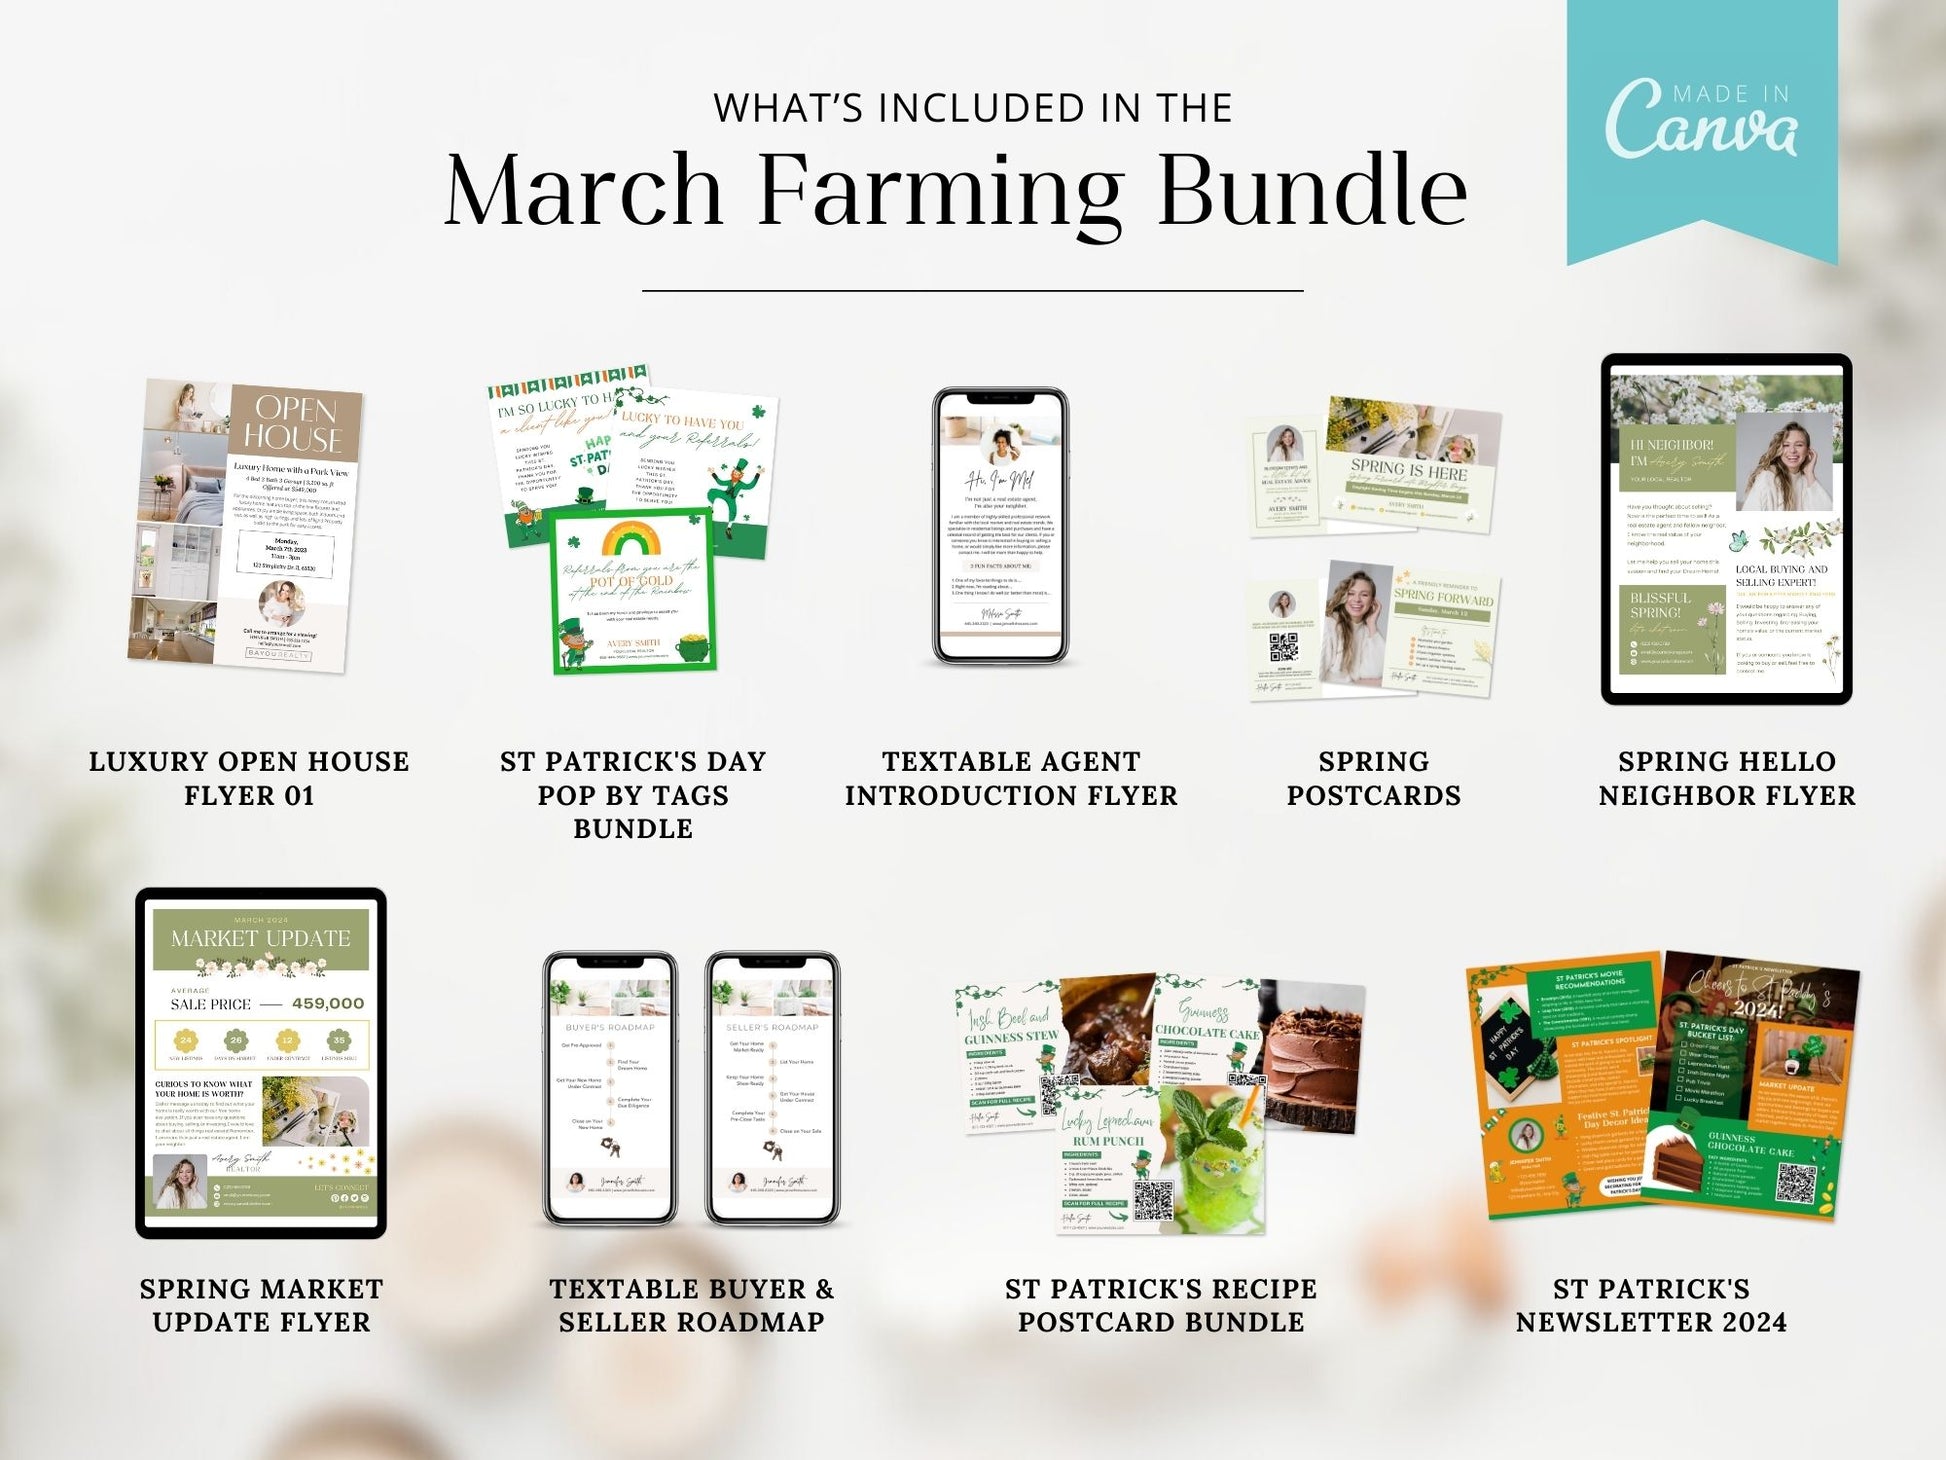 March Farming Bundle - Comprehensive tools for real estate farming and community engagement in March.